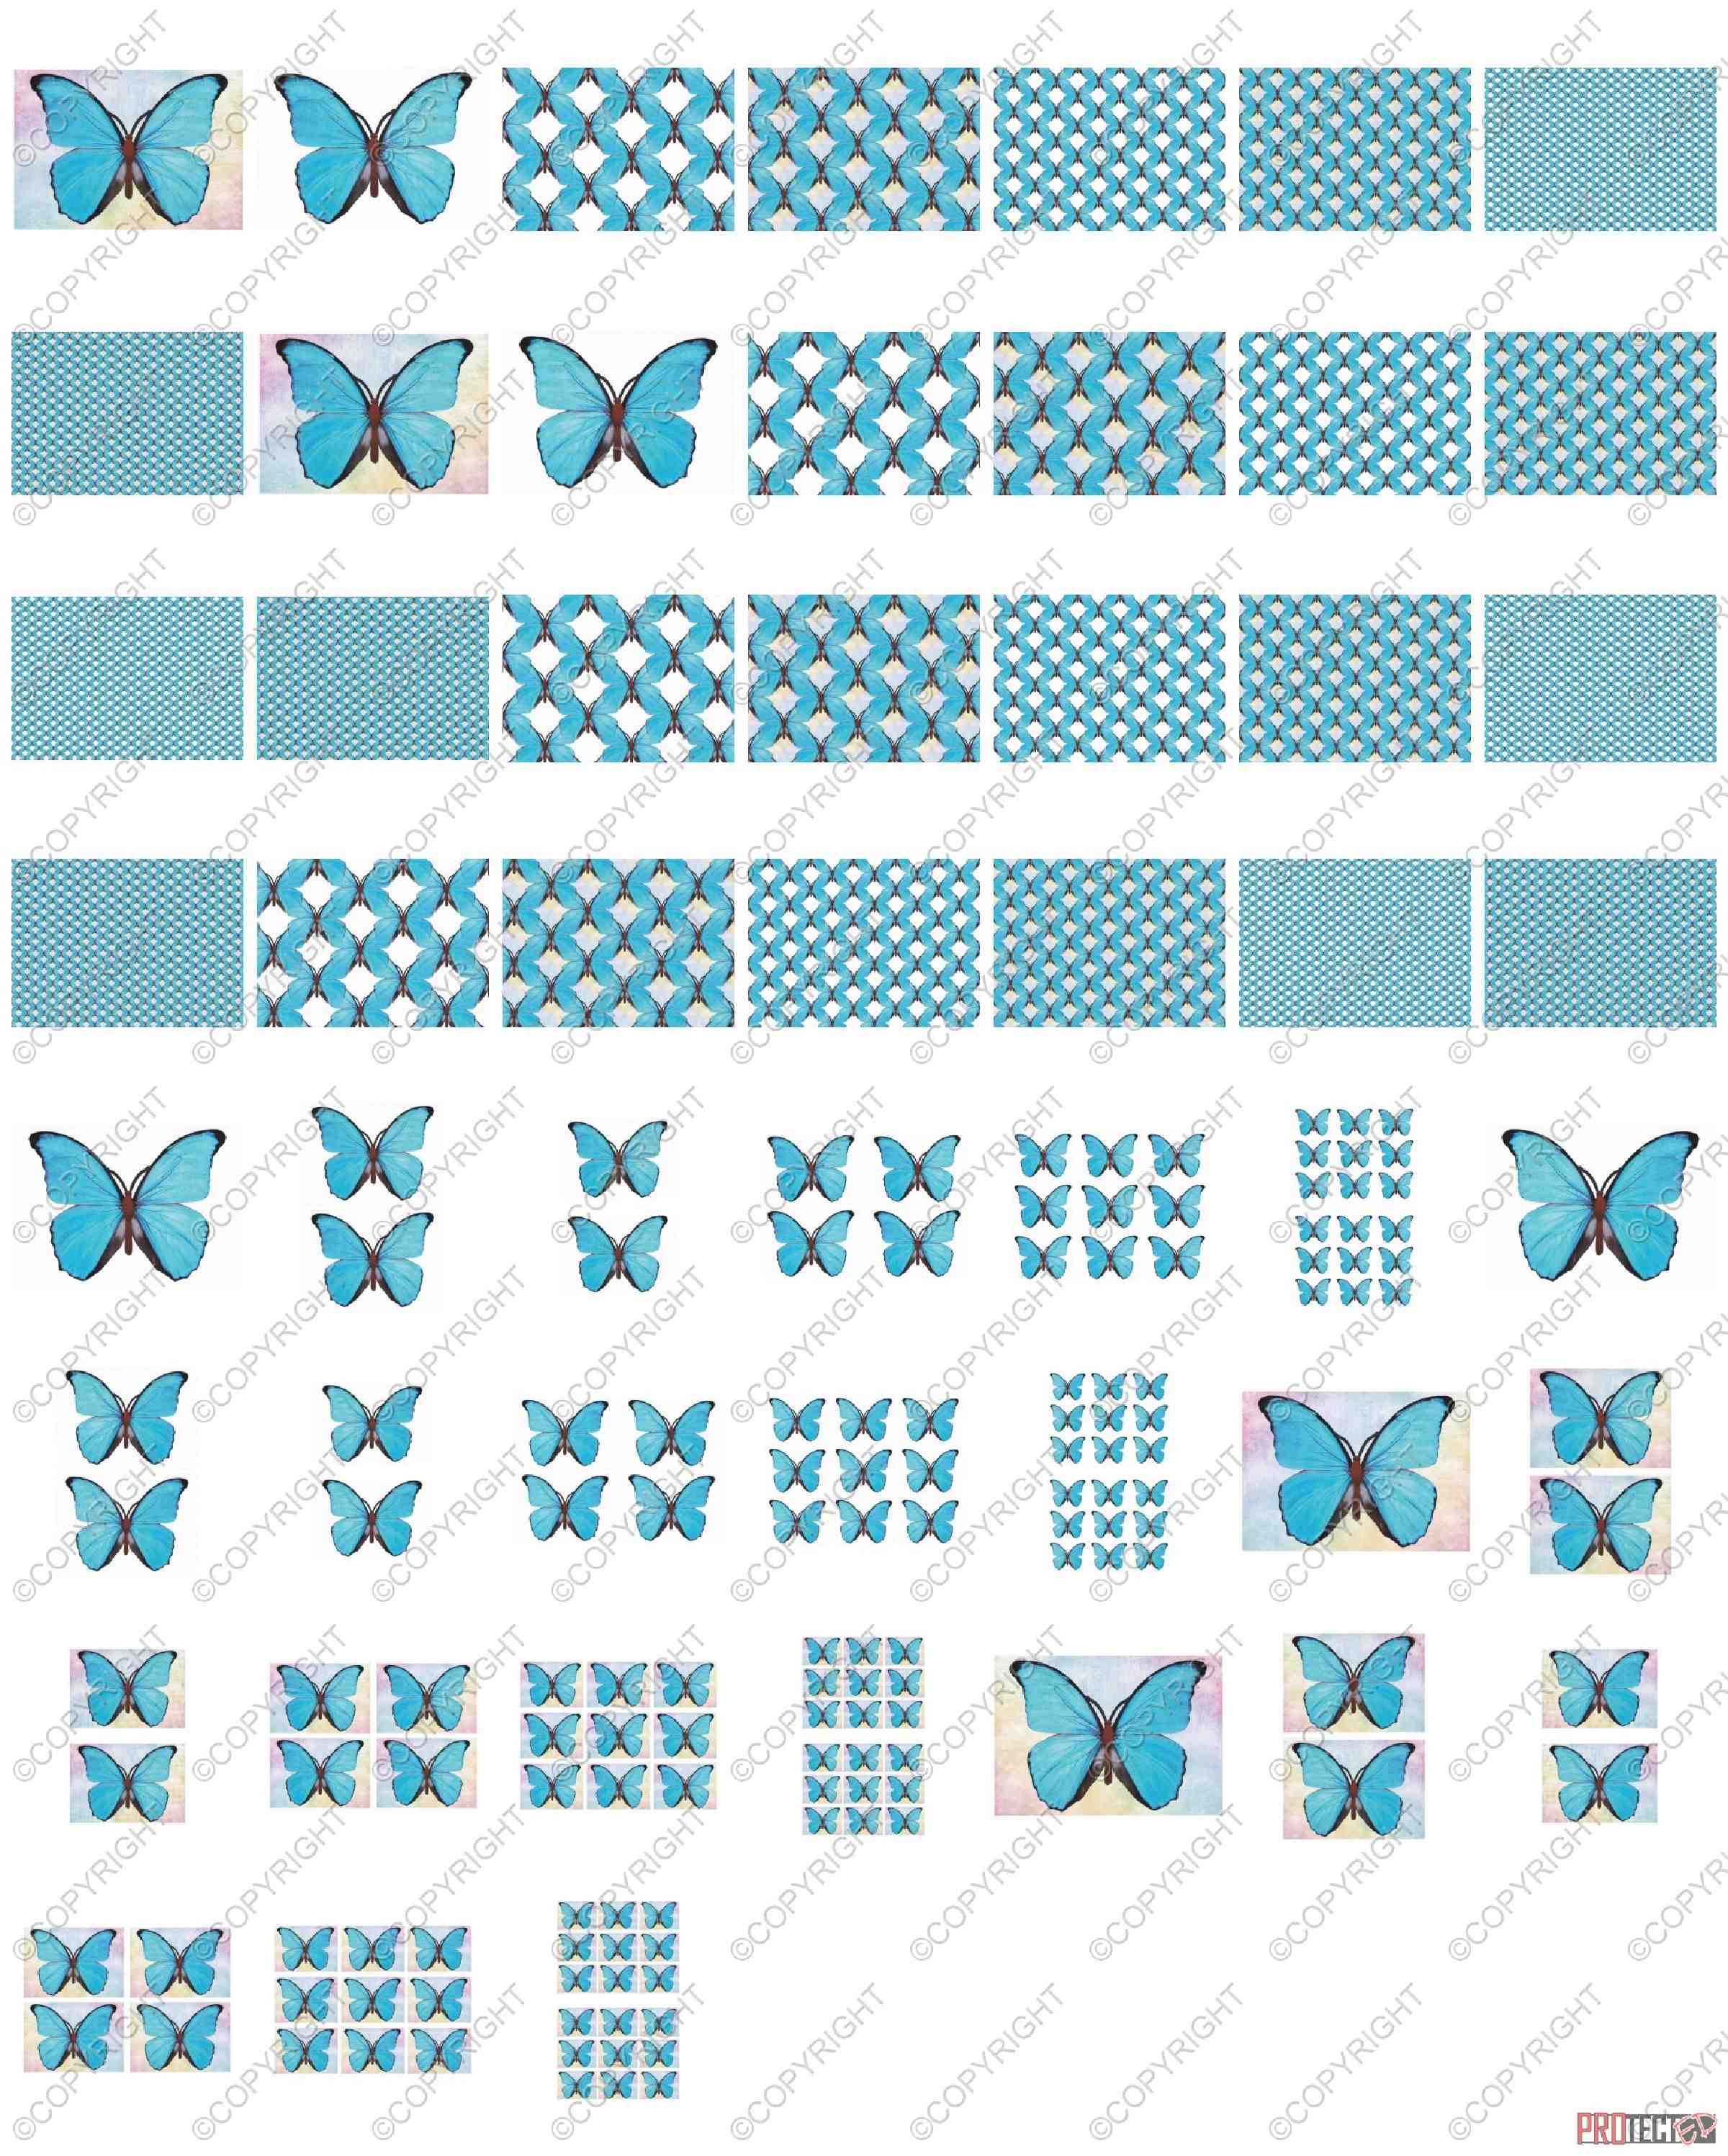 Beautiful Butterflies 09 - 52 Pages to Download